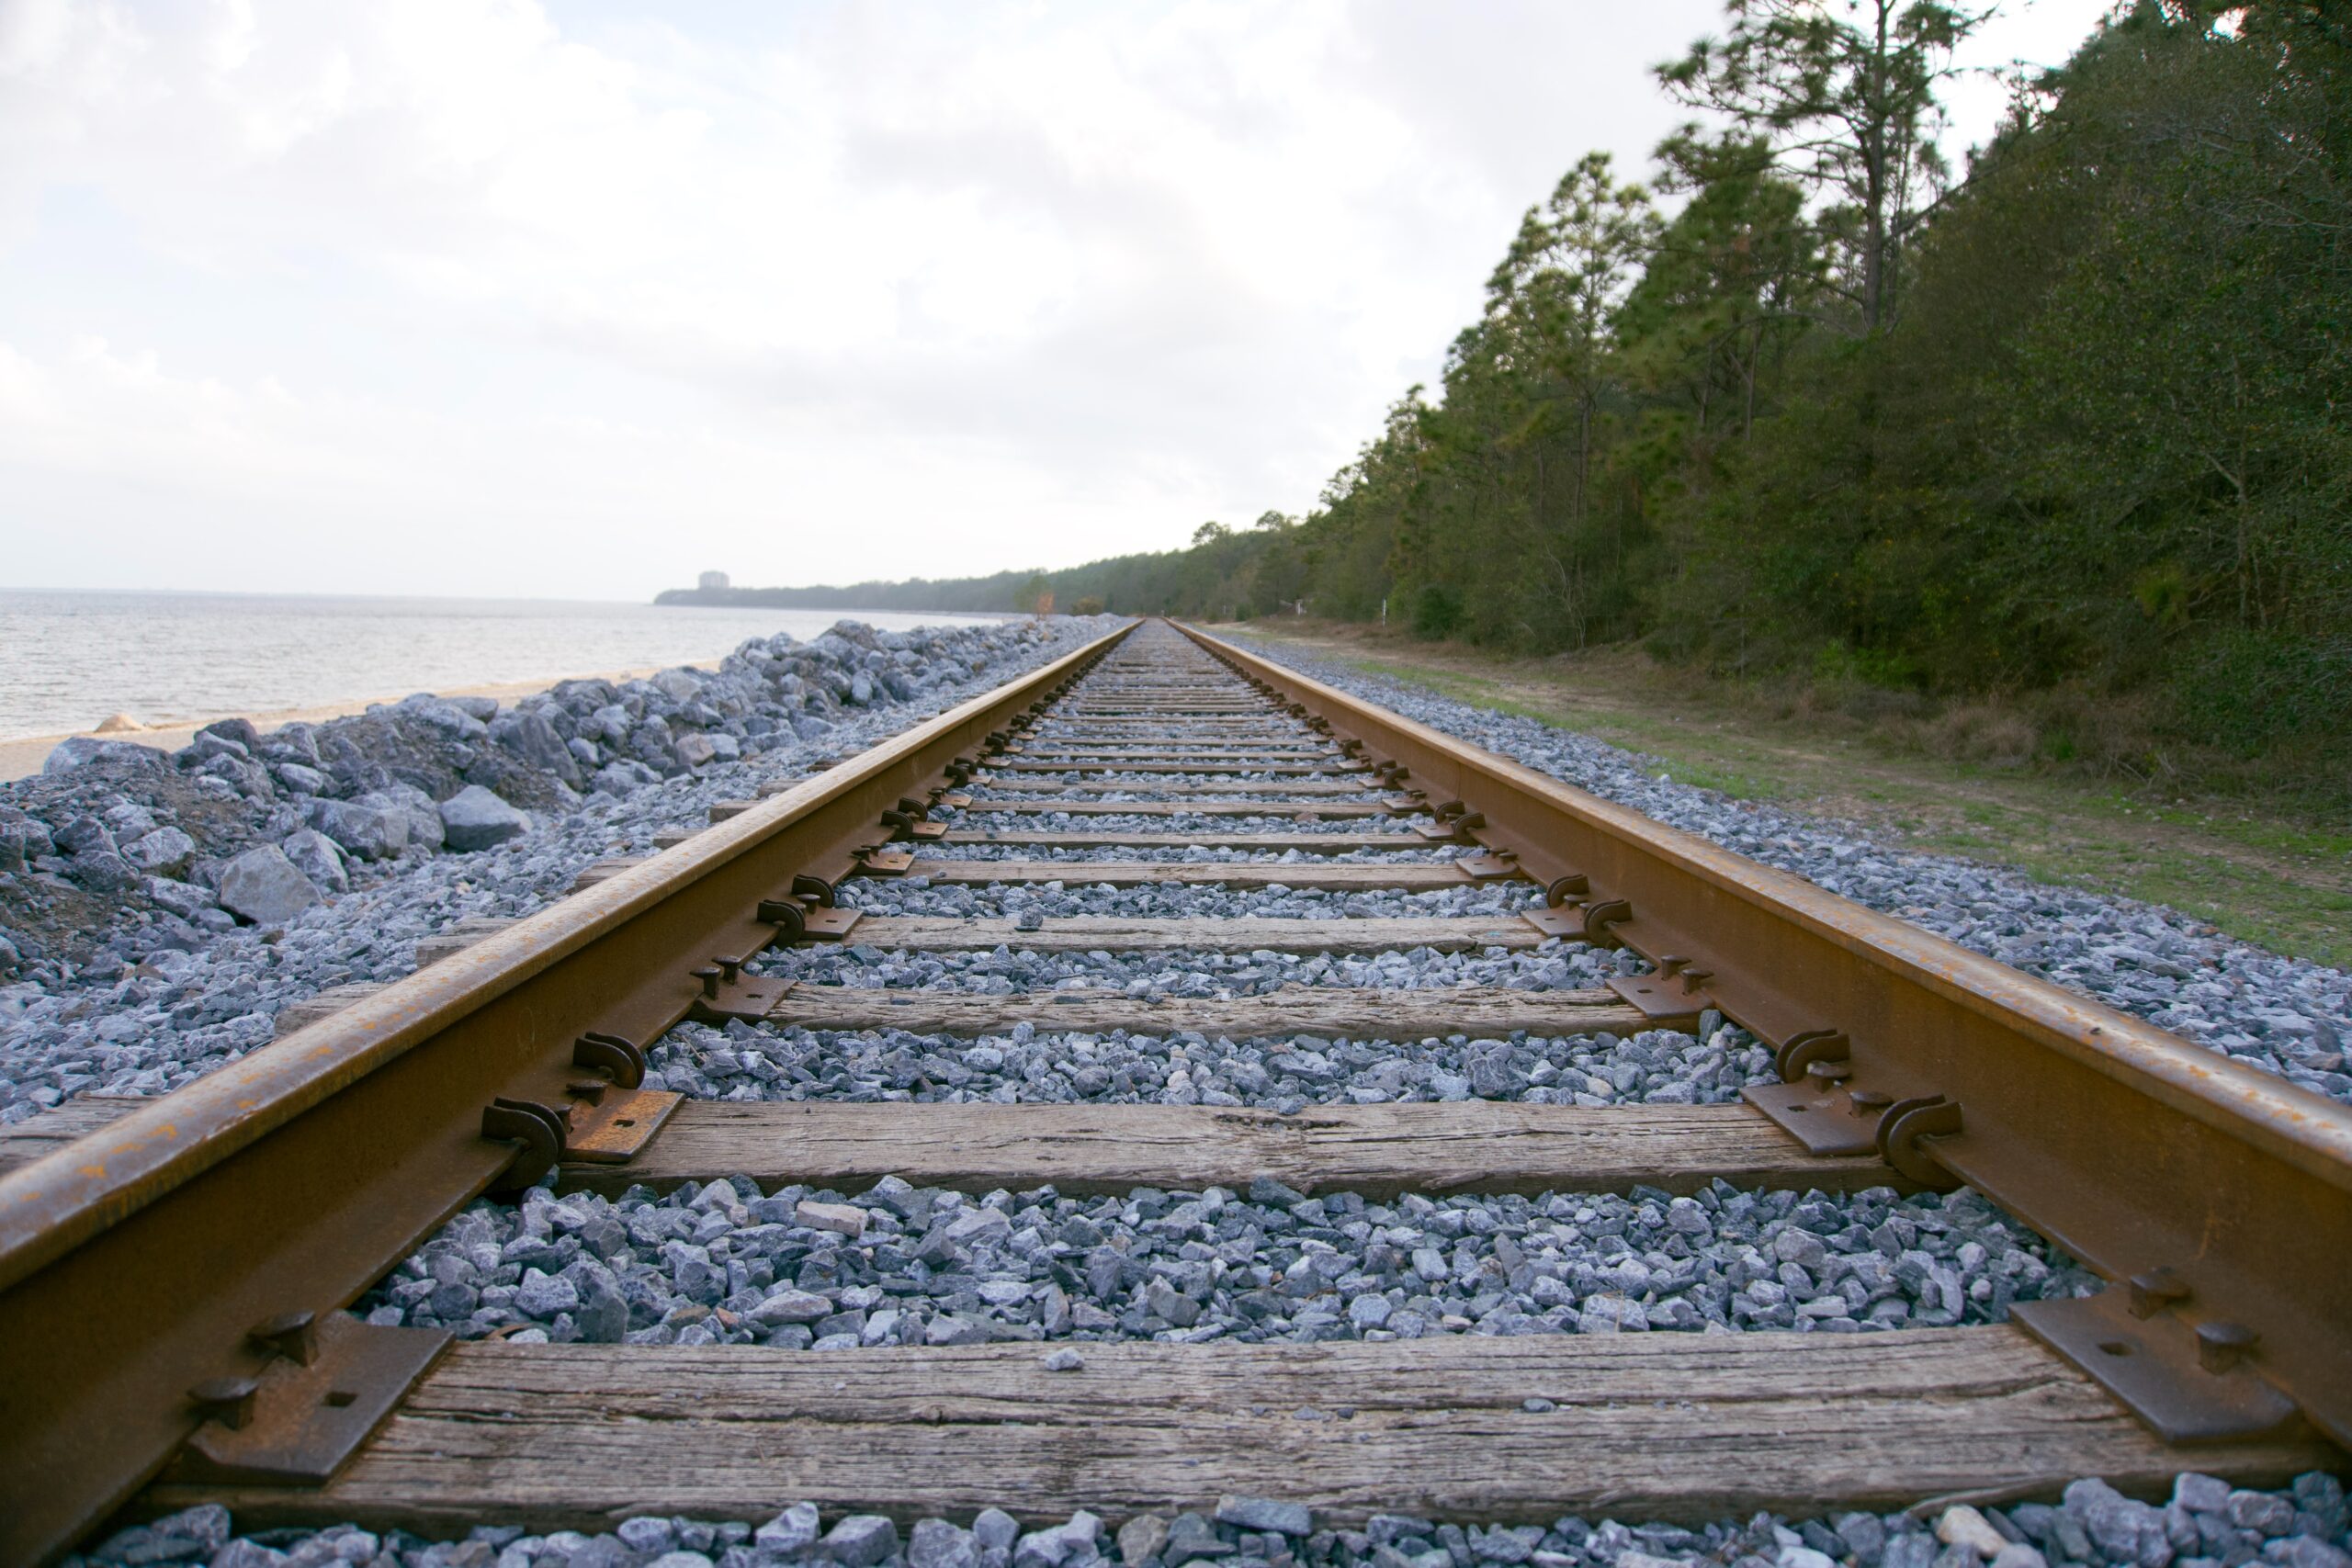 Privately Financing Rail Infrastructure: a pipeline or a pipedream?